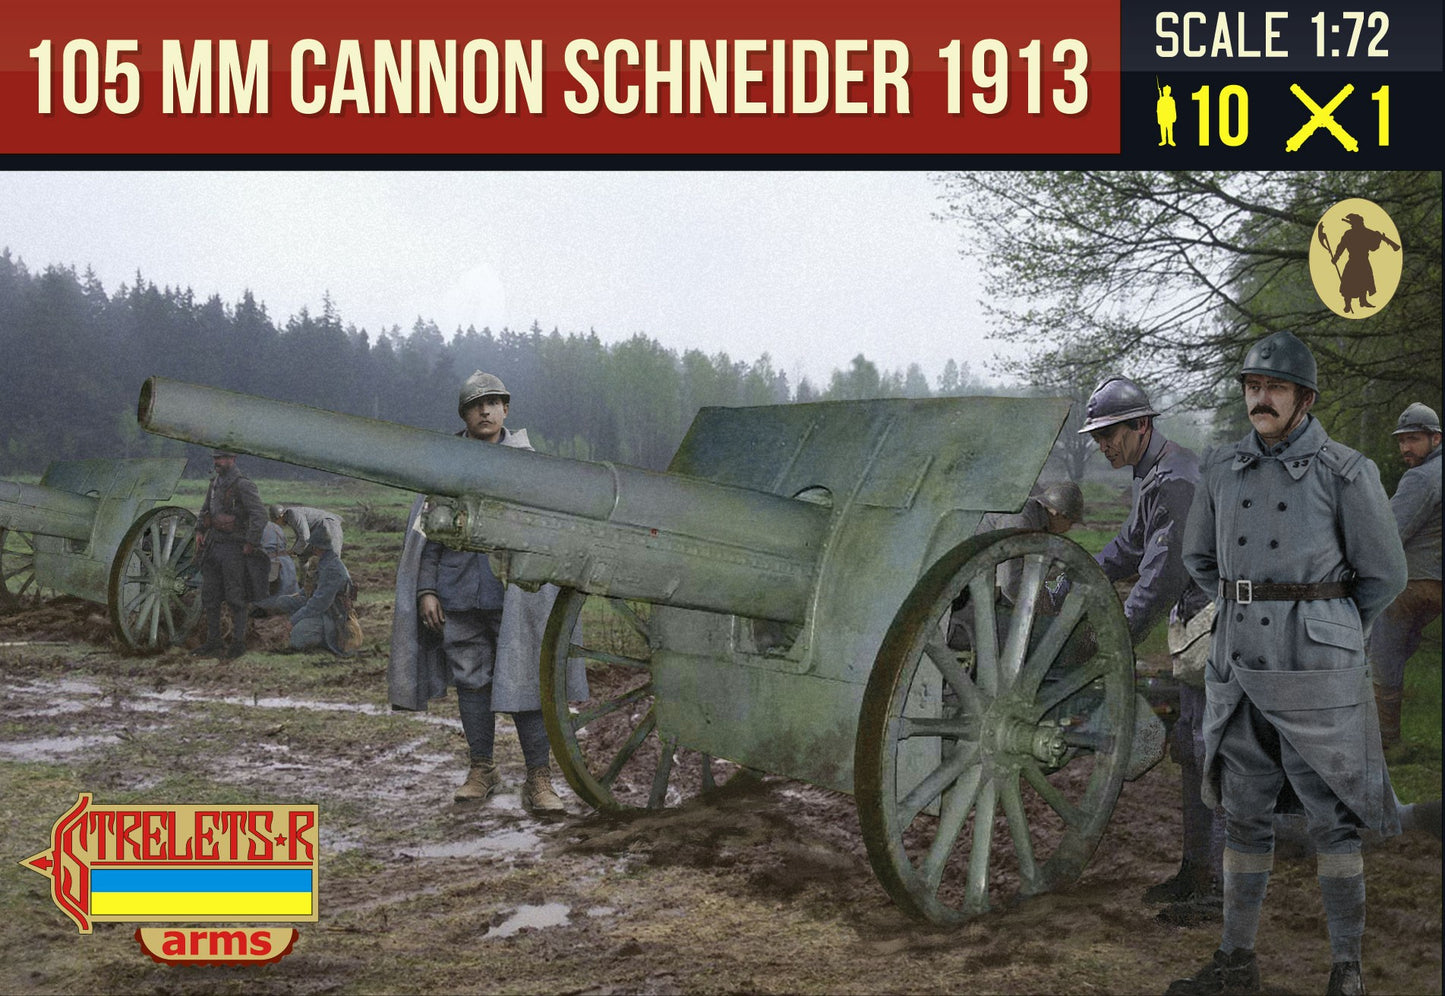 A015 STRELETS Canon de 105 mle 1913 Schneider with French Crew WWI 1/72